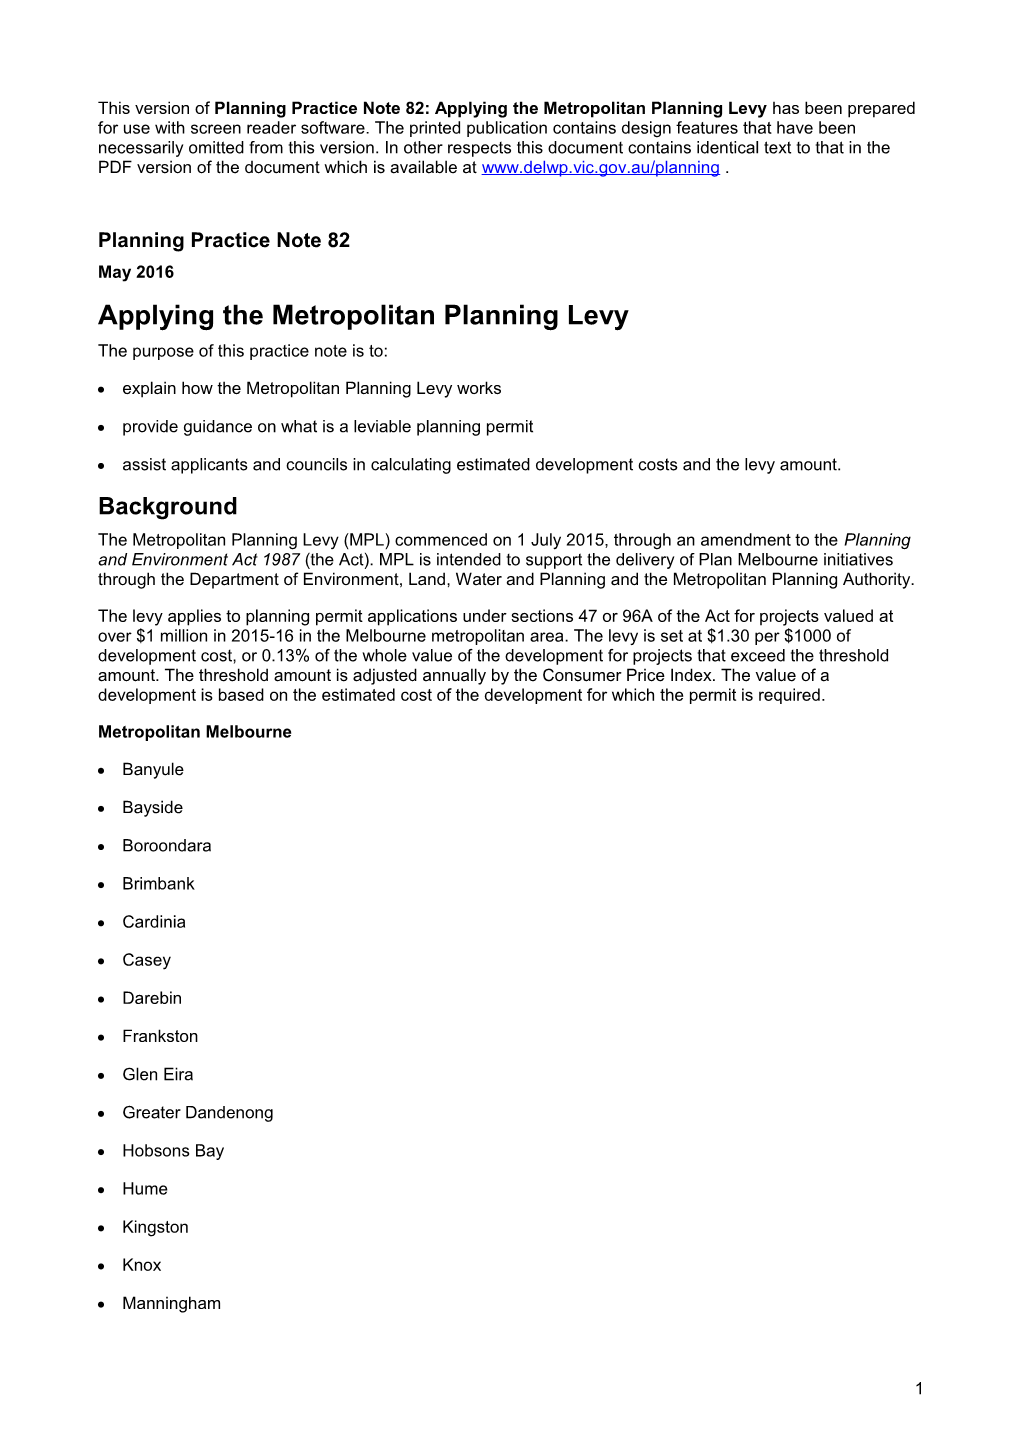 Planning Practice Note 1: Applying the Heritage Overlay